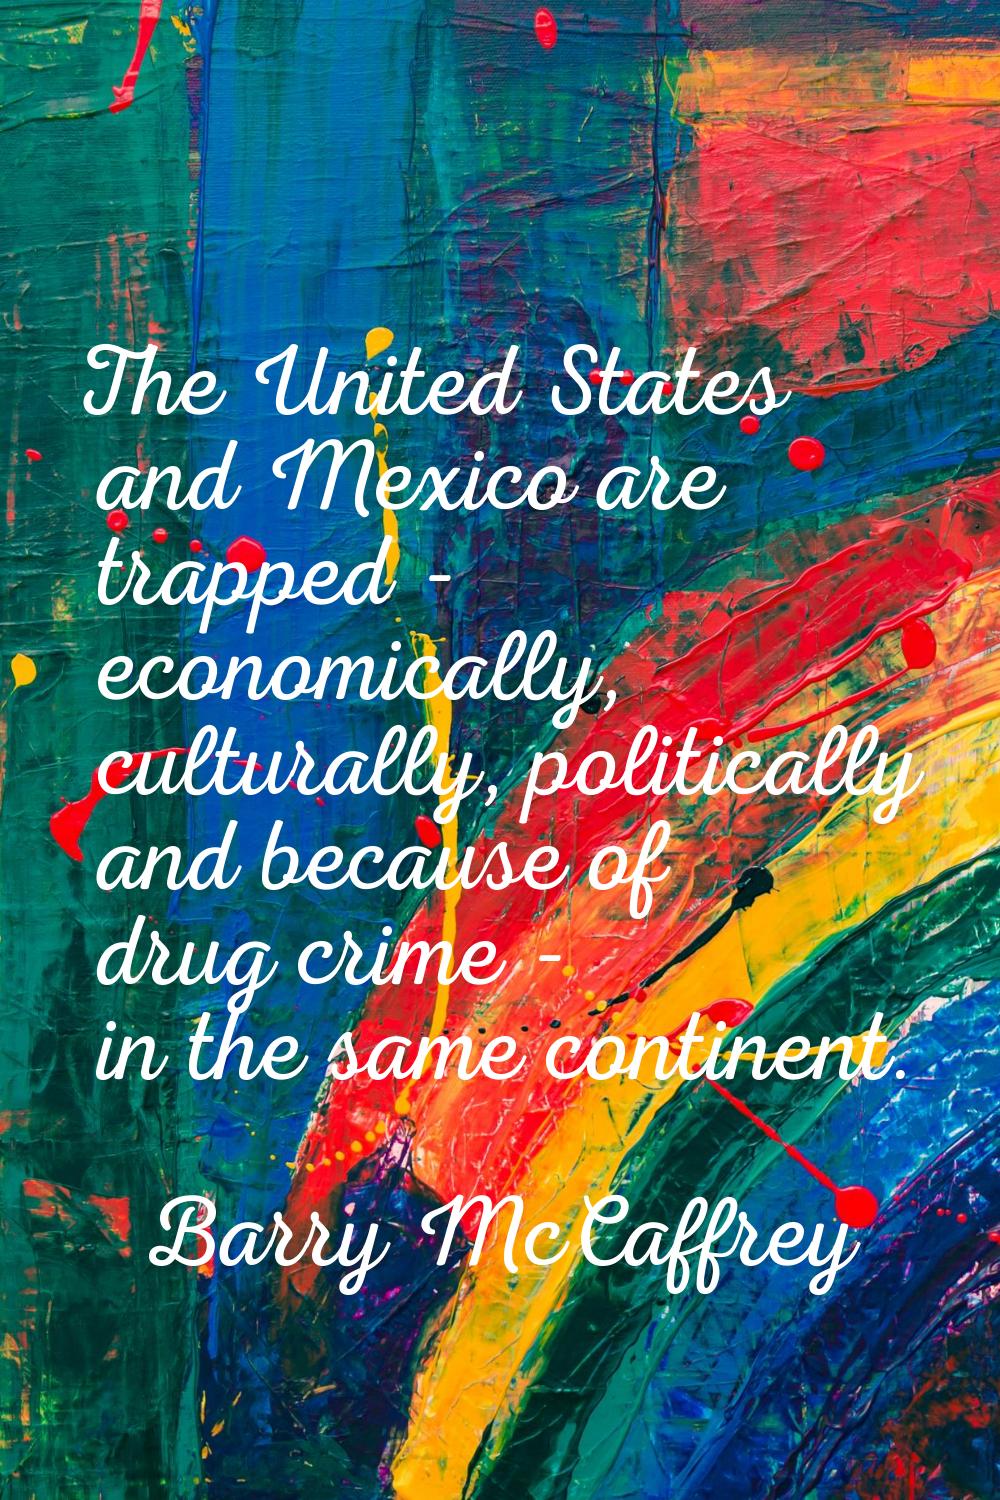 The United States and Mexico are trapped - economically, culturally, politically and because of dru